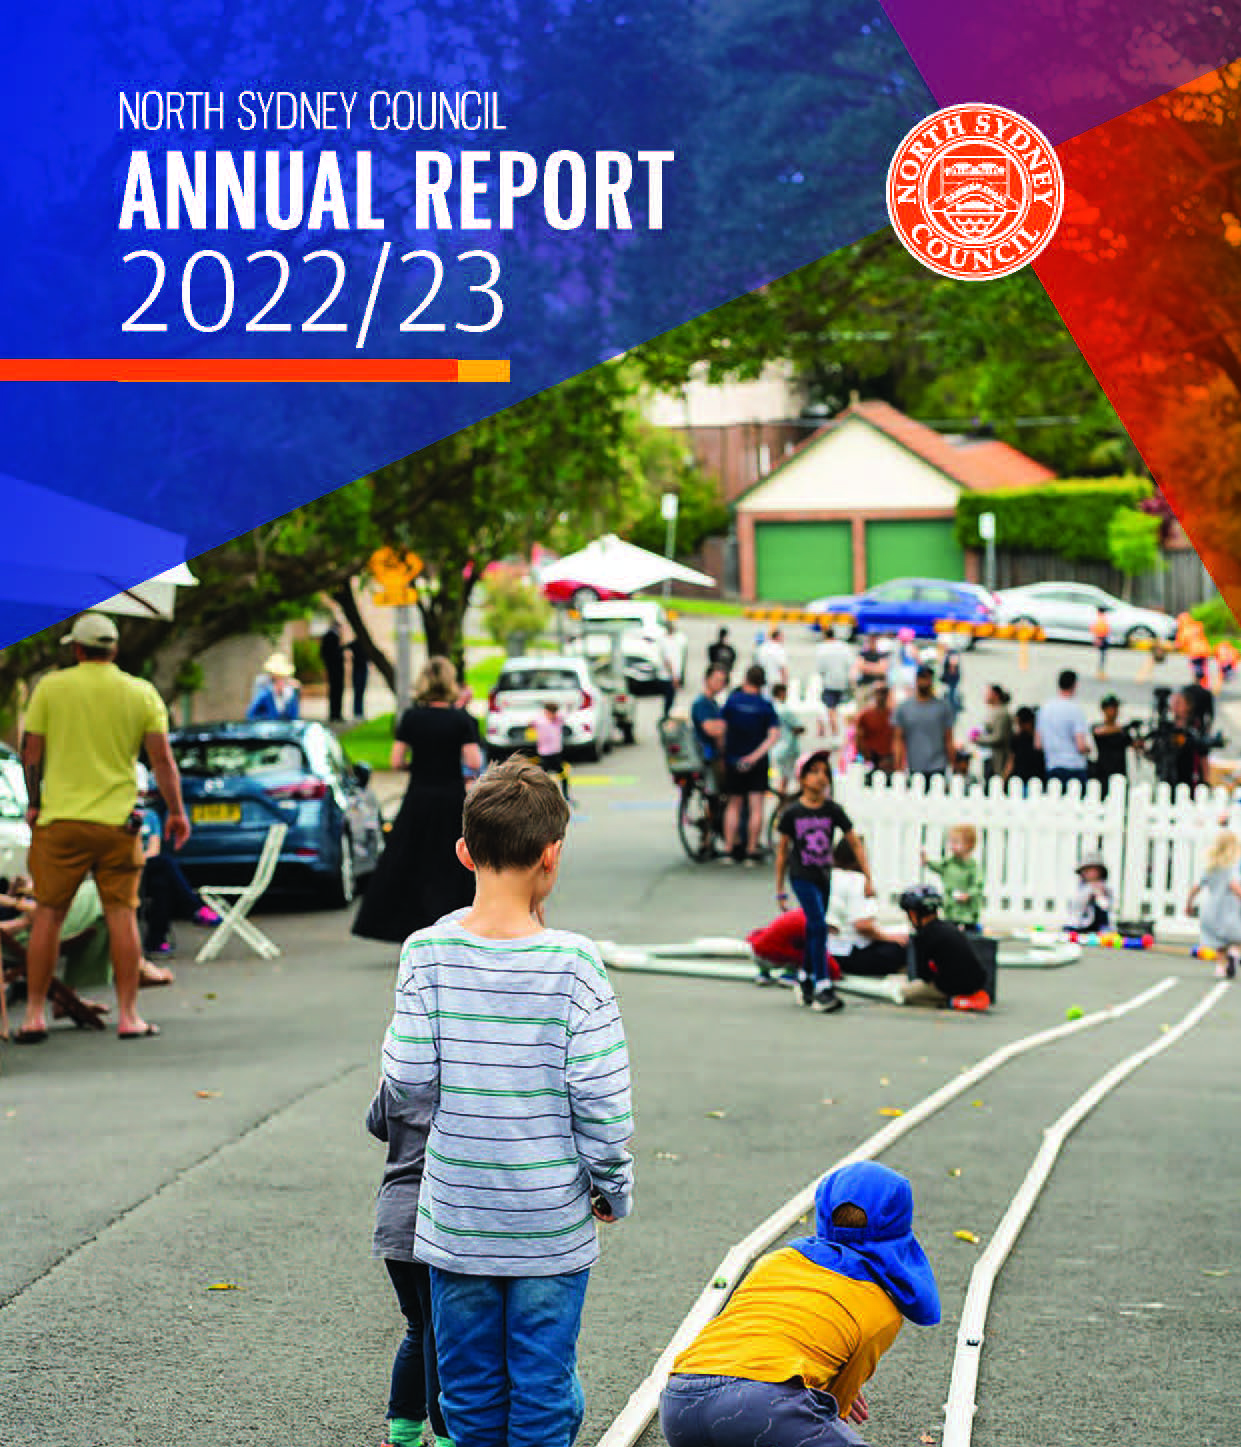 Annual report cover with boys playing game on street